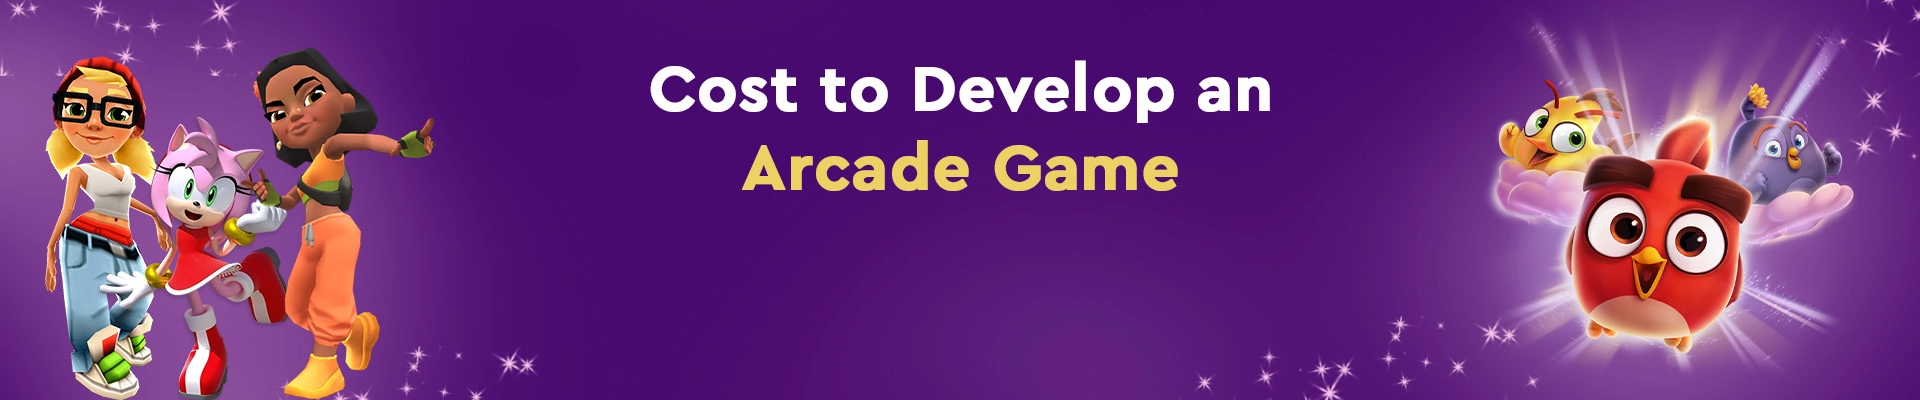 Cost to Develop an Arcade Game